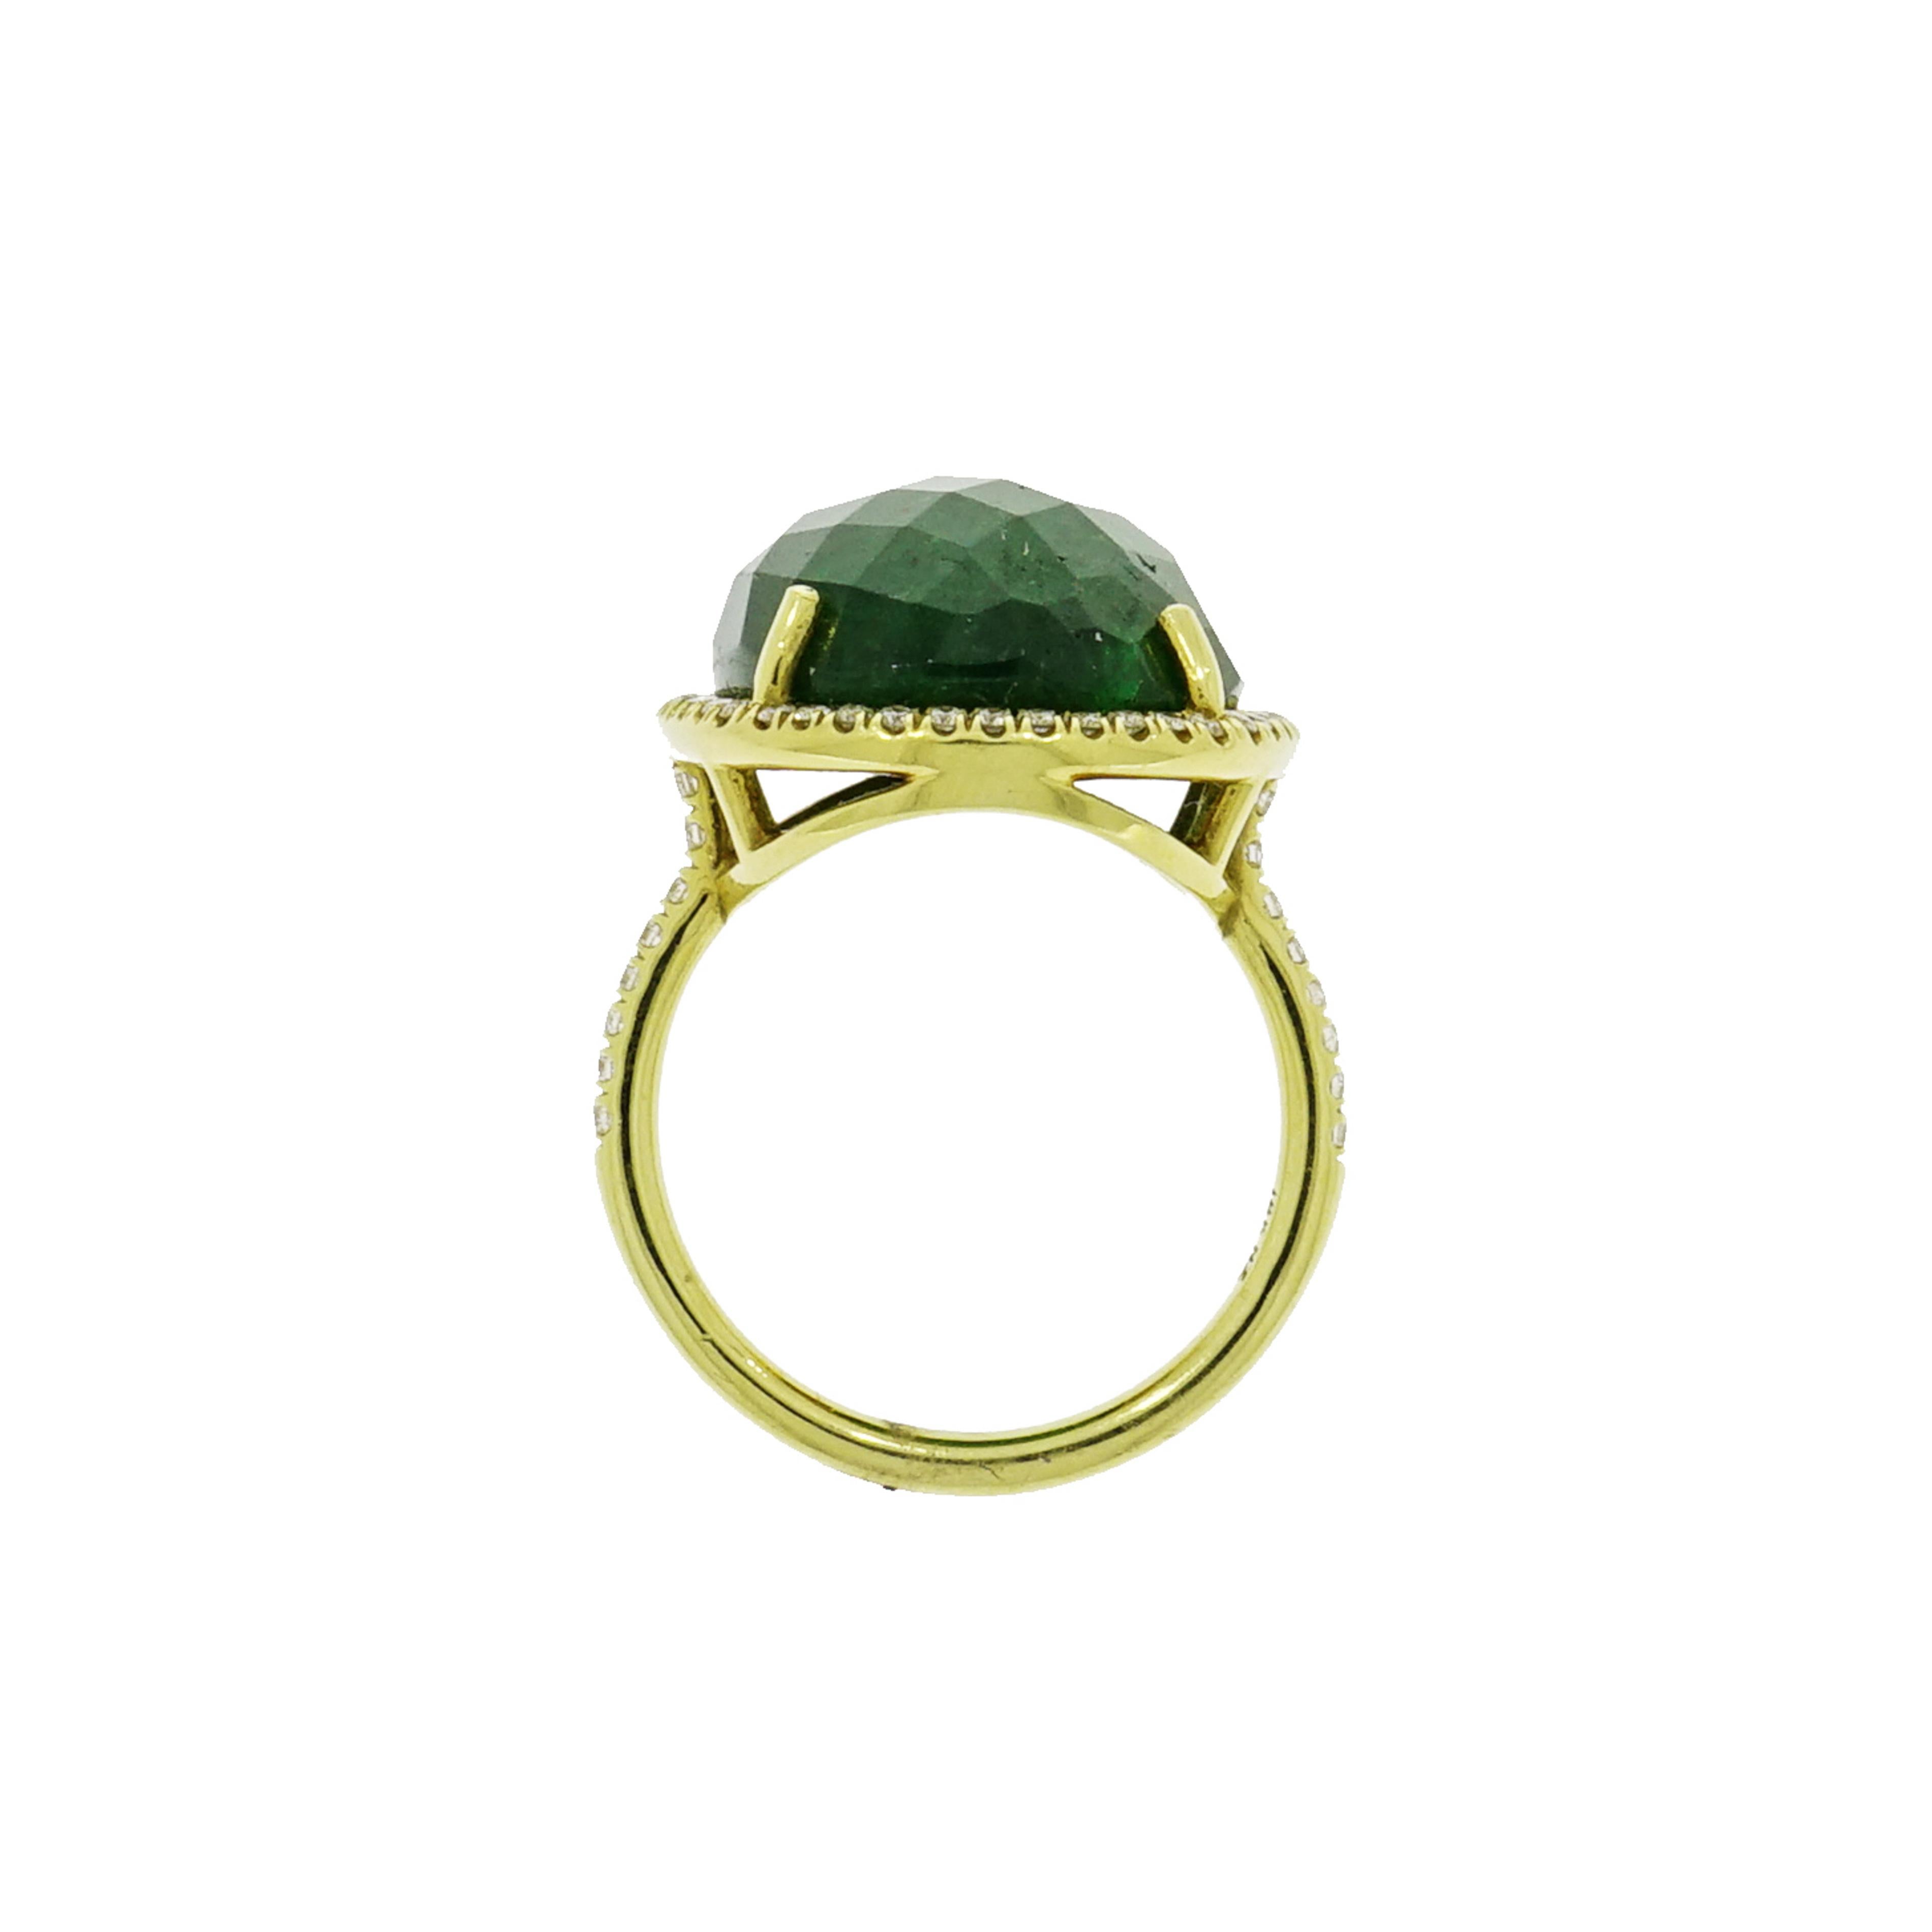 Bring some visual interest to your cocktail ring... Abstract designs are a chic look on the ring finger and will definitely garner attention.
This gorgeous deep green faceted Tsavorite is set in yellow gold and framed by a brilliant halo of 0.38